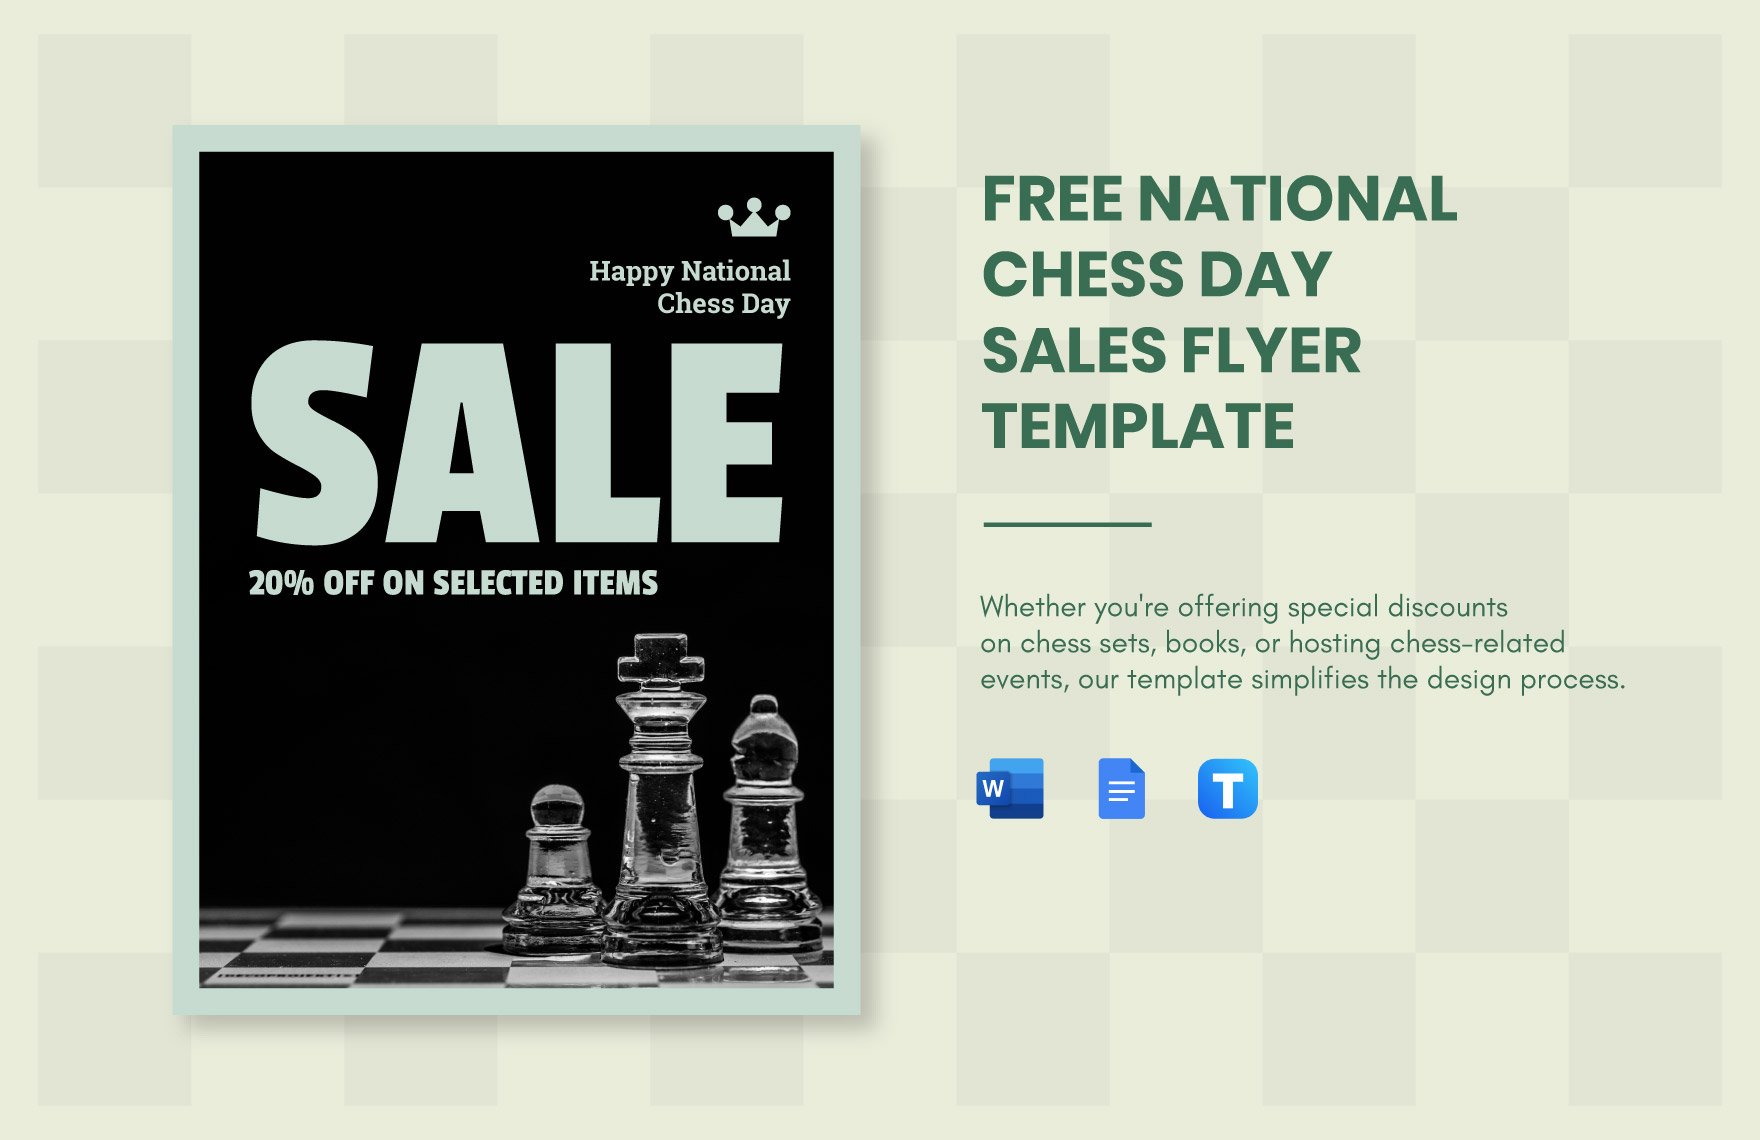 National Chess Day Sales Flyer Template in Word, Google Docs